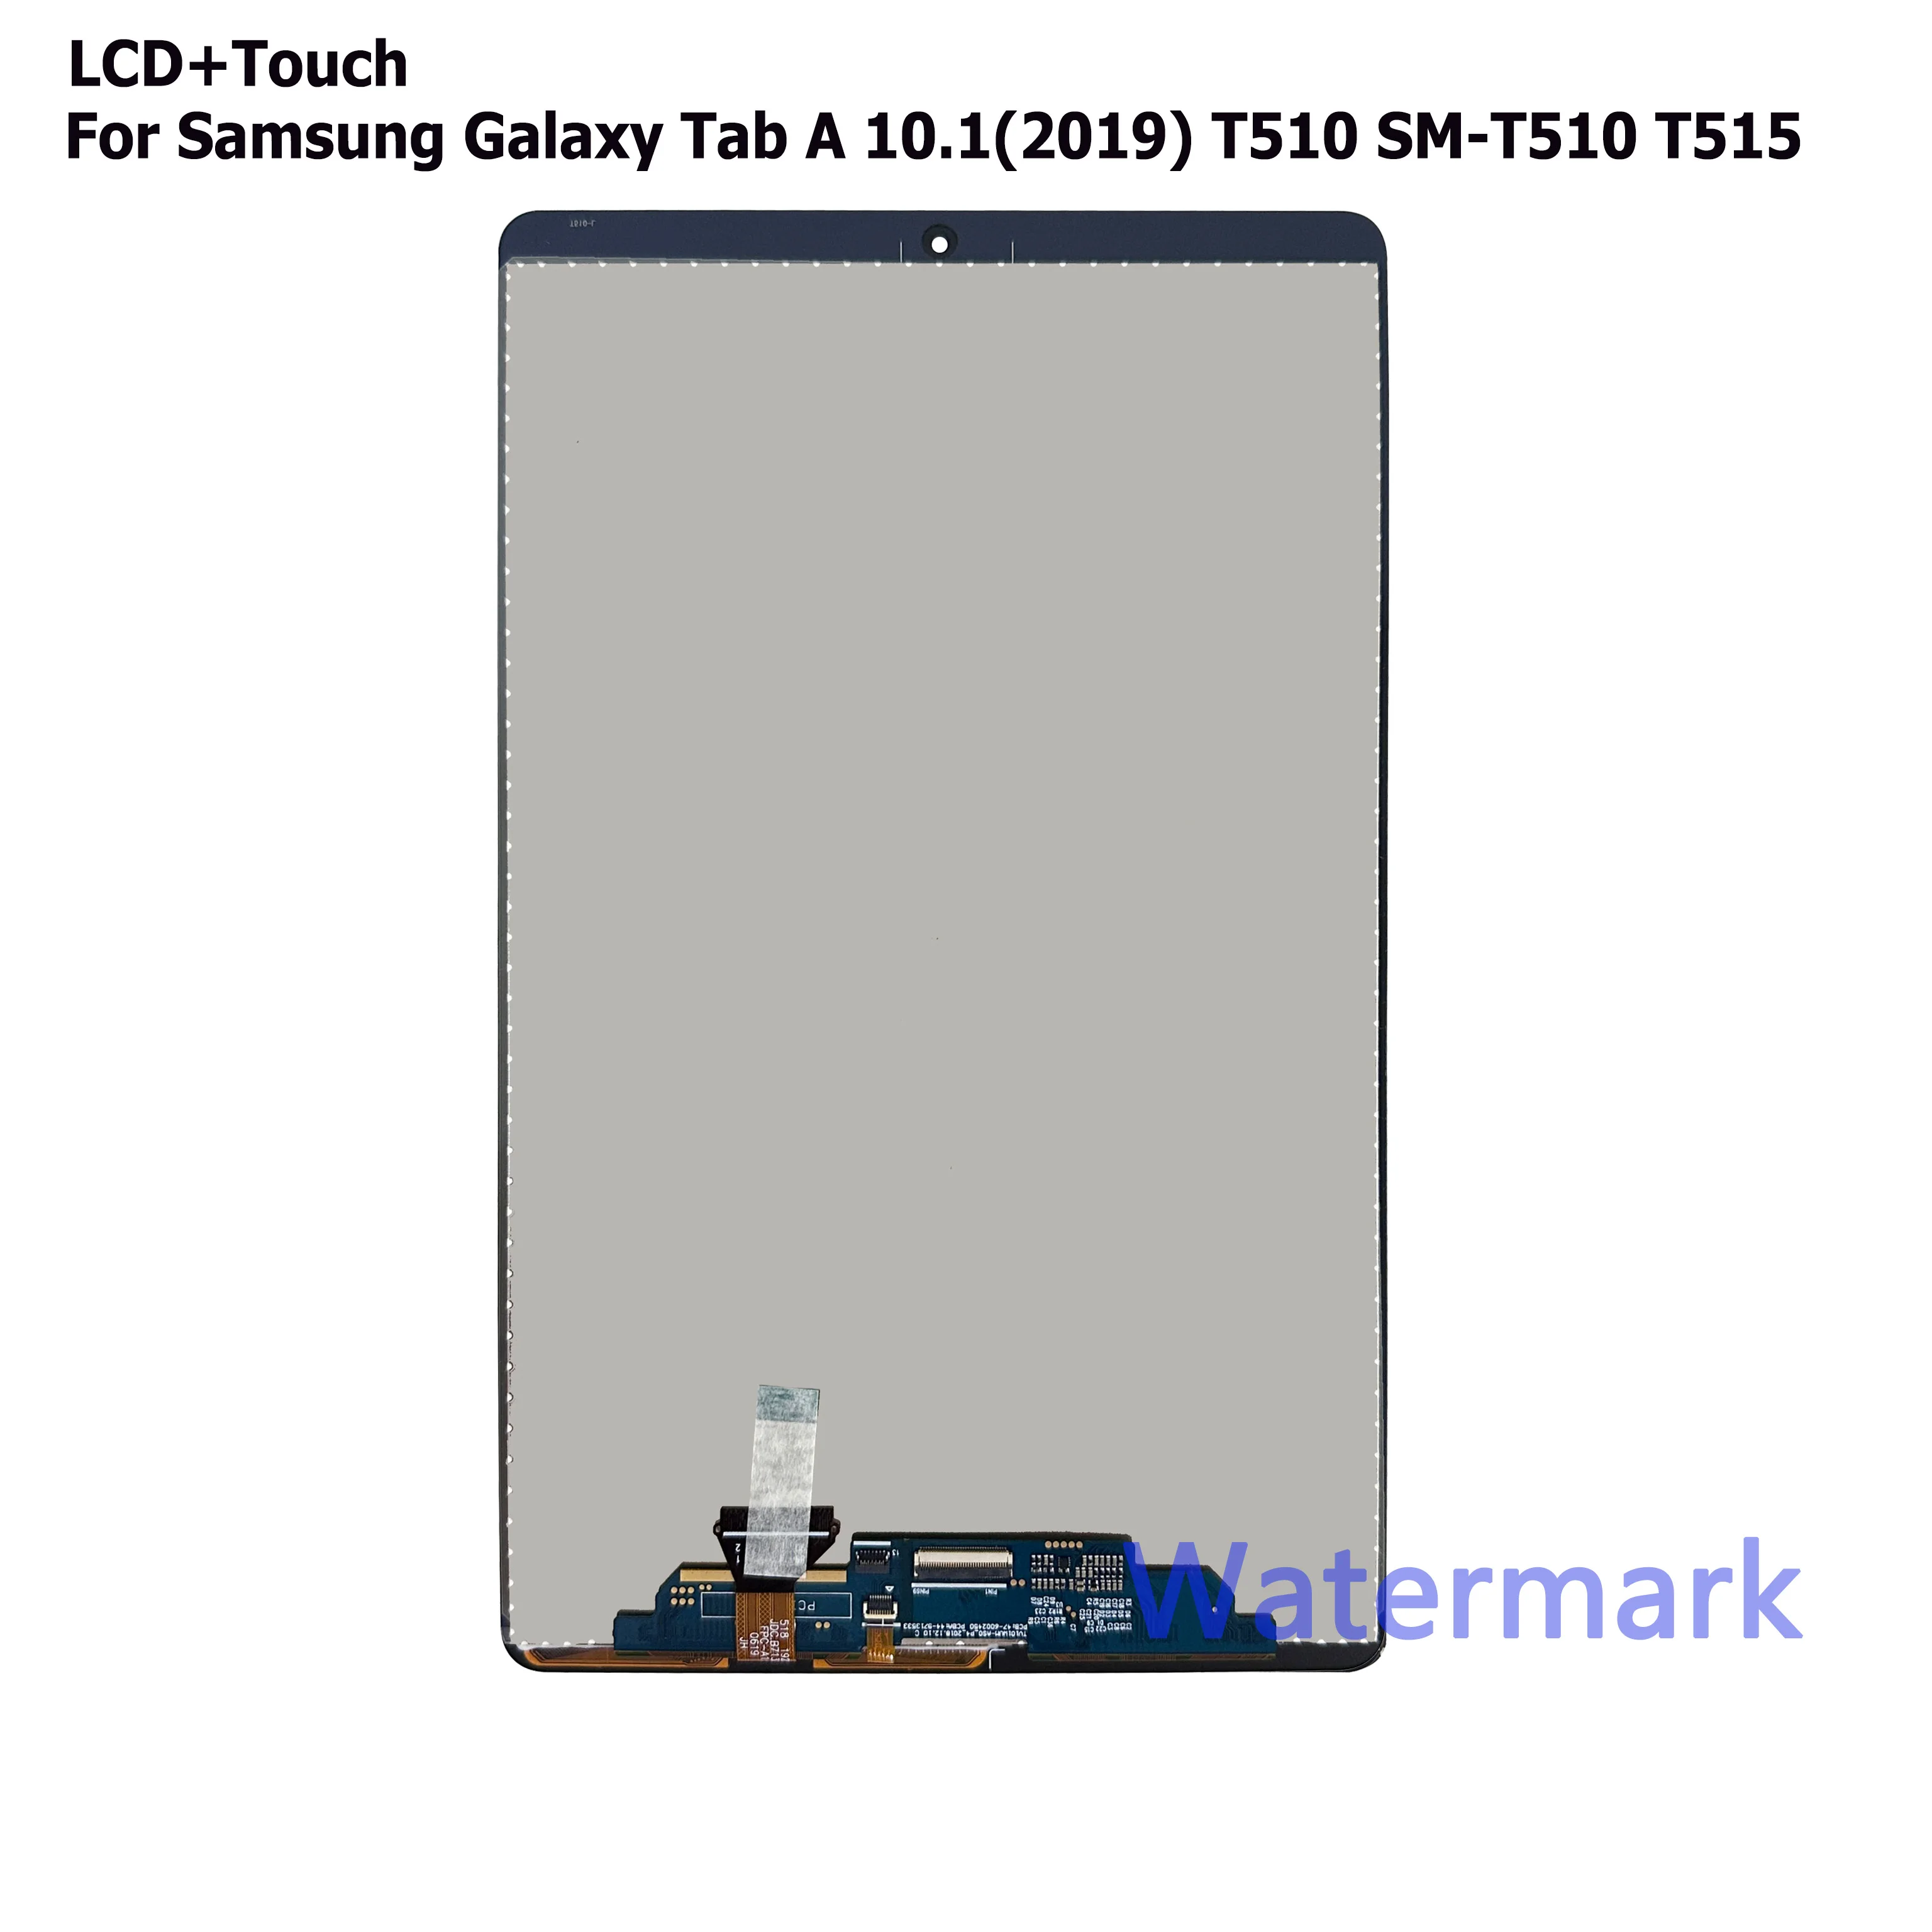 10.1 Lcd Replacement For Samsung Galaxy Tab A 10.1(2019) Wifi T510 Sm-t510  T510n Lcd Display Touch Screen Assembly T515 - Tablet Lcds & Panels -  AliExpress